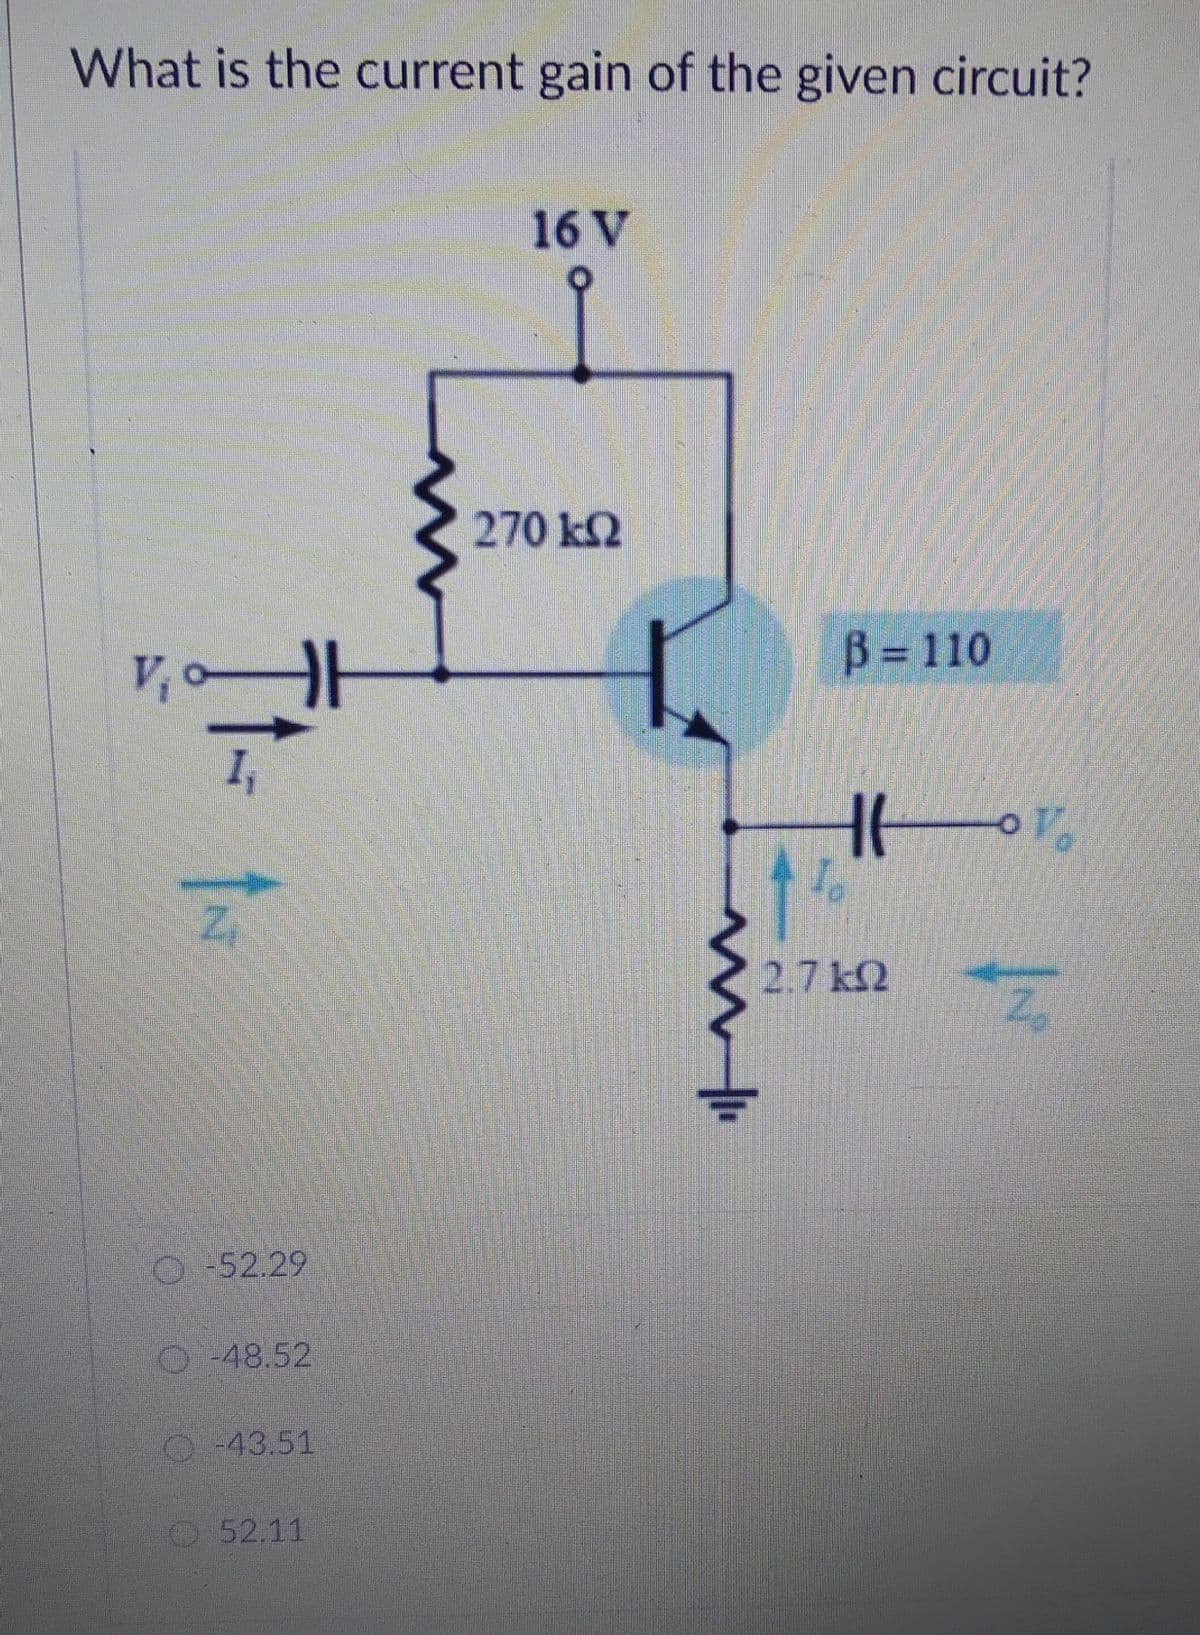 What is the current gain of the given circuit?
16 V
270 k2
V, o
B = 110
Vo
2.7 k2
O 52.29
O48.52
-43.51
52.11
